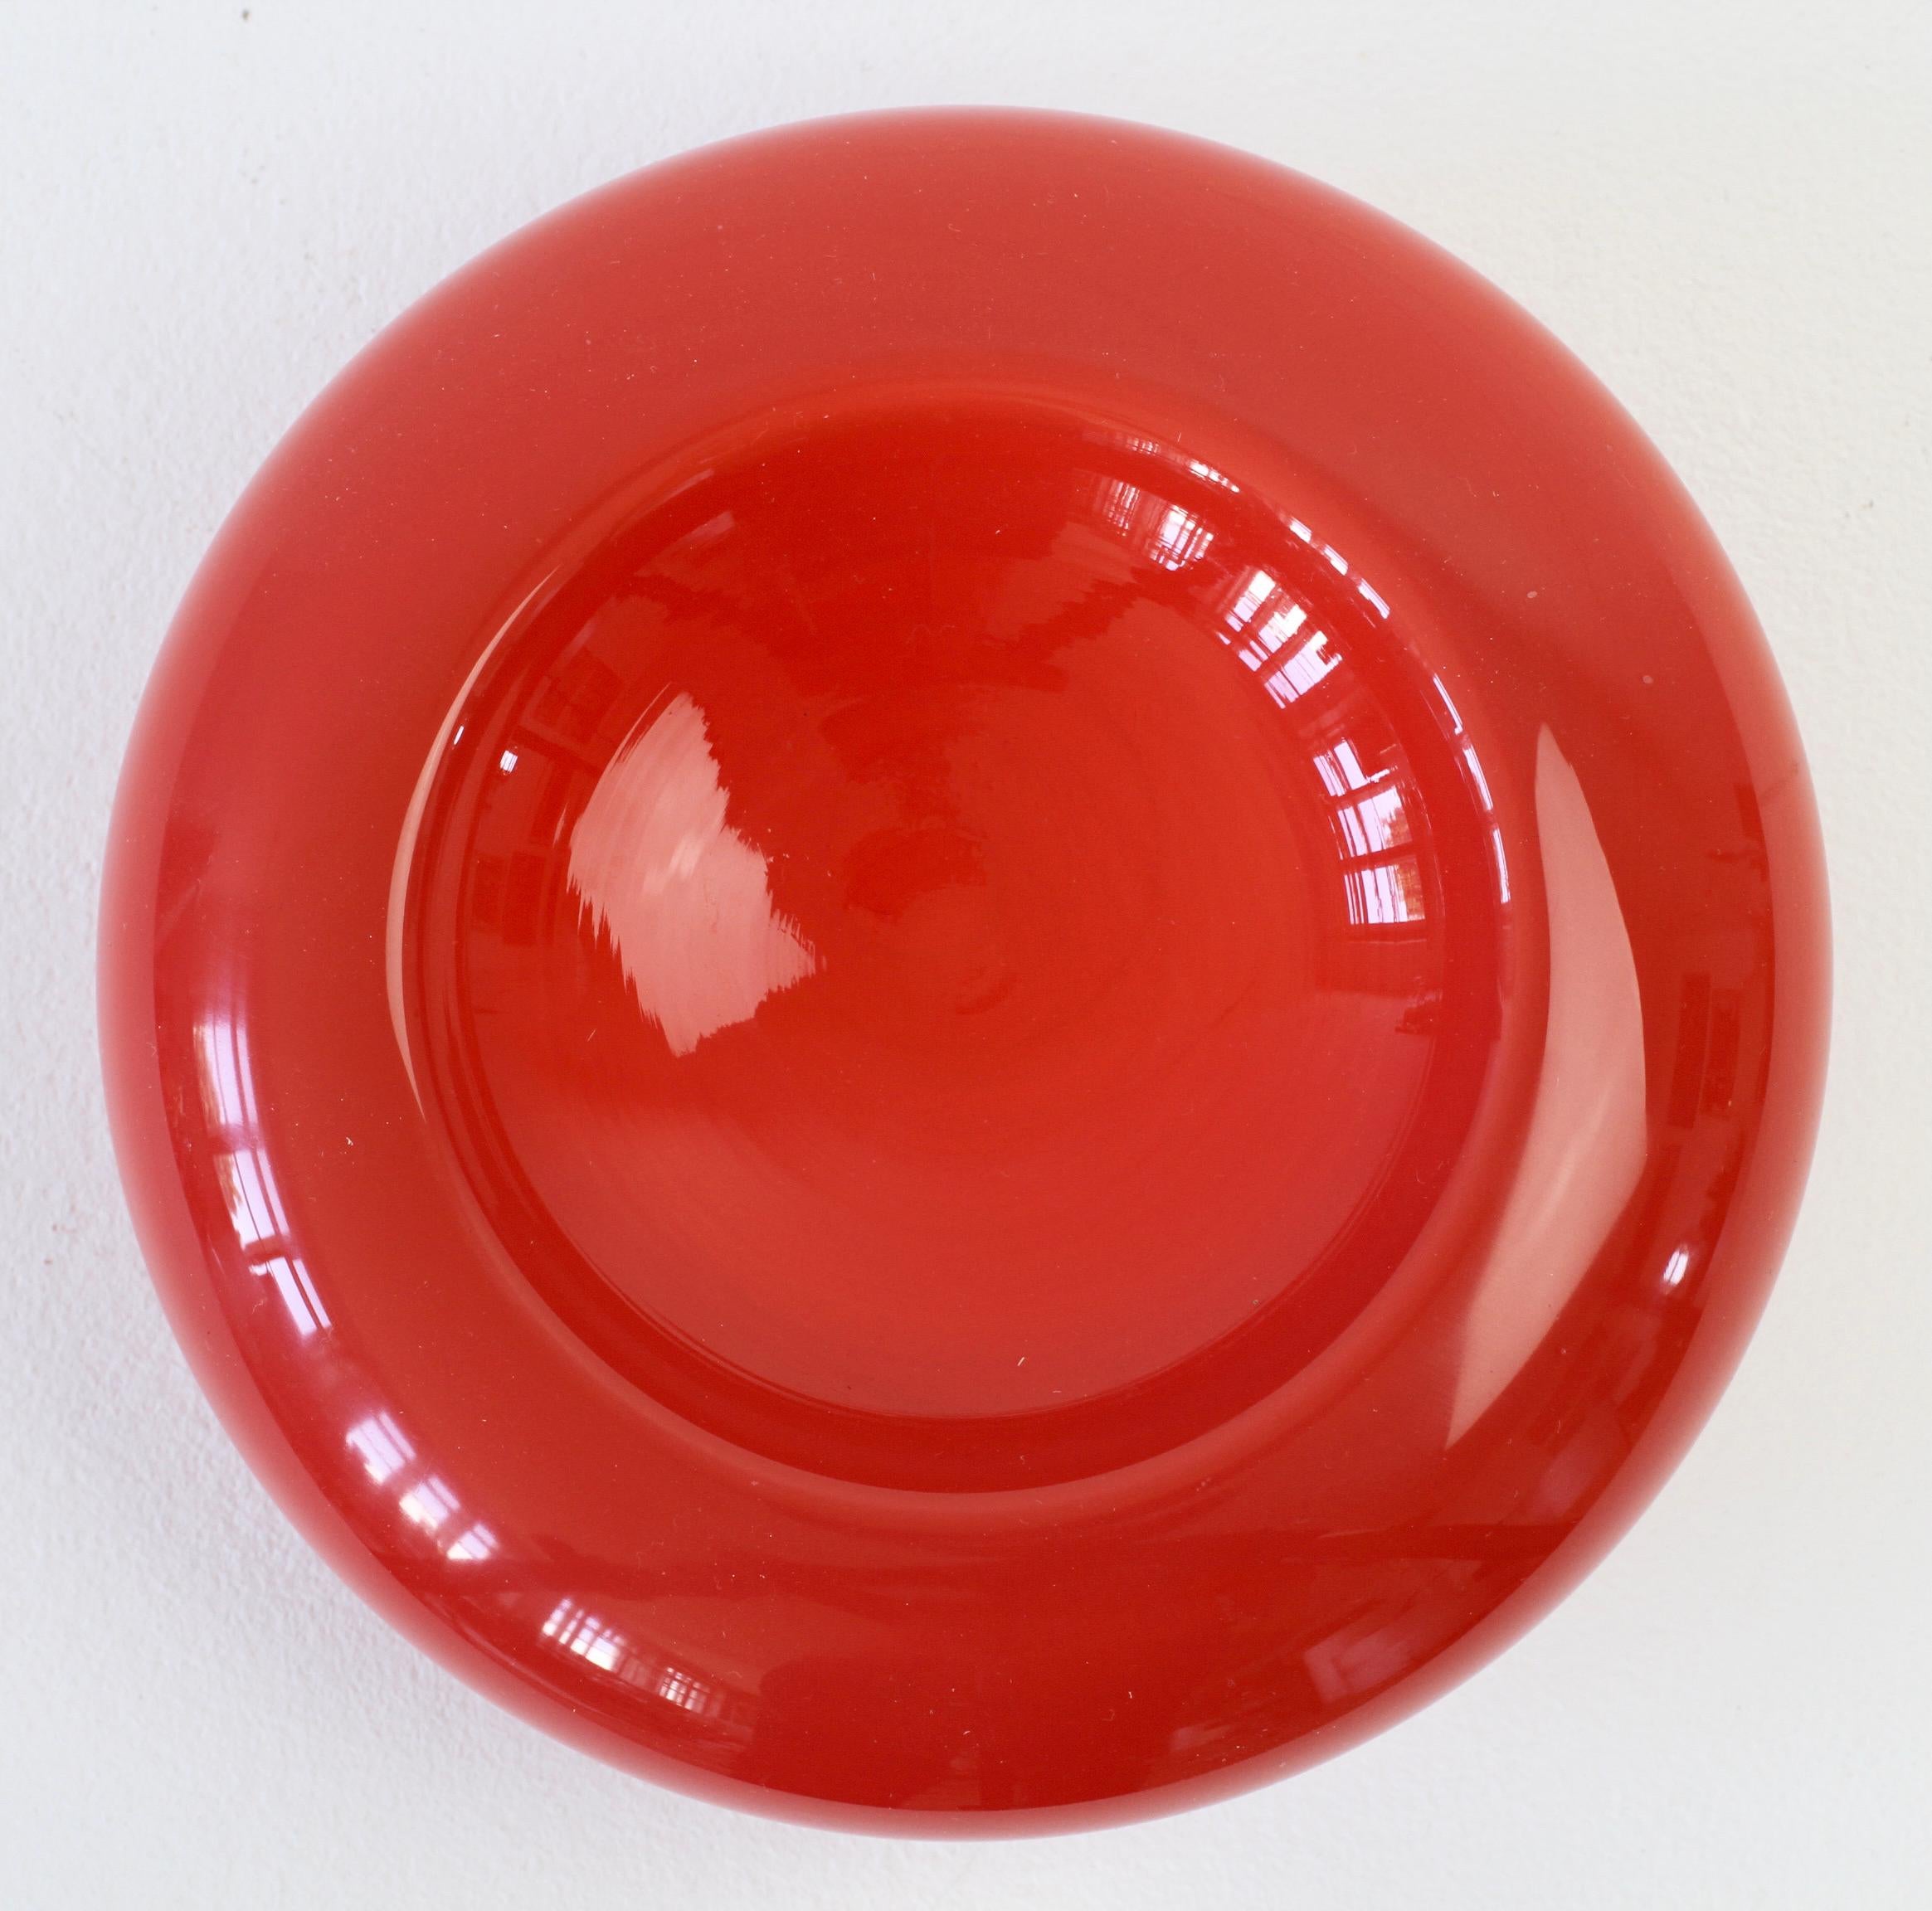 Wonderful vintage Mid-Century Modern glass bowl or vase in dark red by Cenedese of Murano, Italy. 

This can be used as a bowl or as a vase when turned upside down - perfect for displaying short stemmed decorative flowers.

A fun, funky and